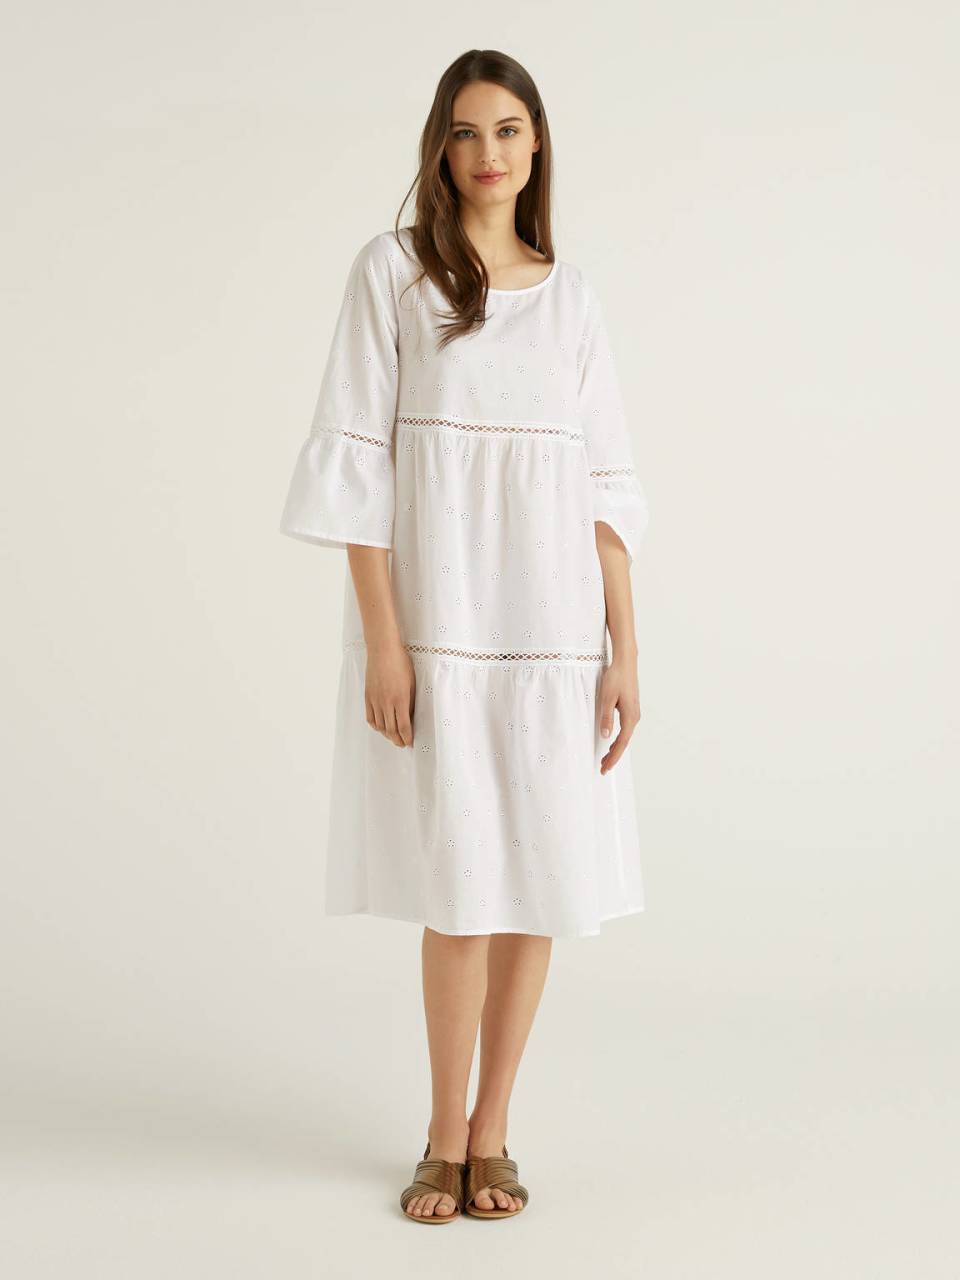 Benetton Dress in pure cotton broderie anglaise. 1